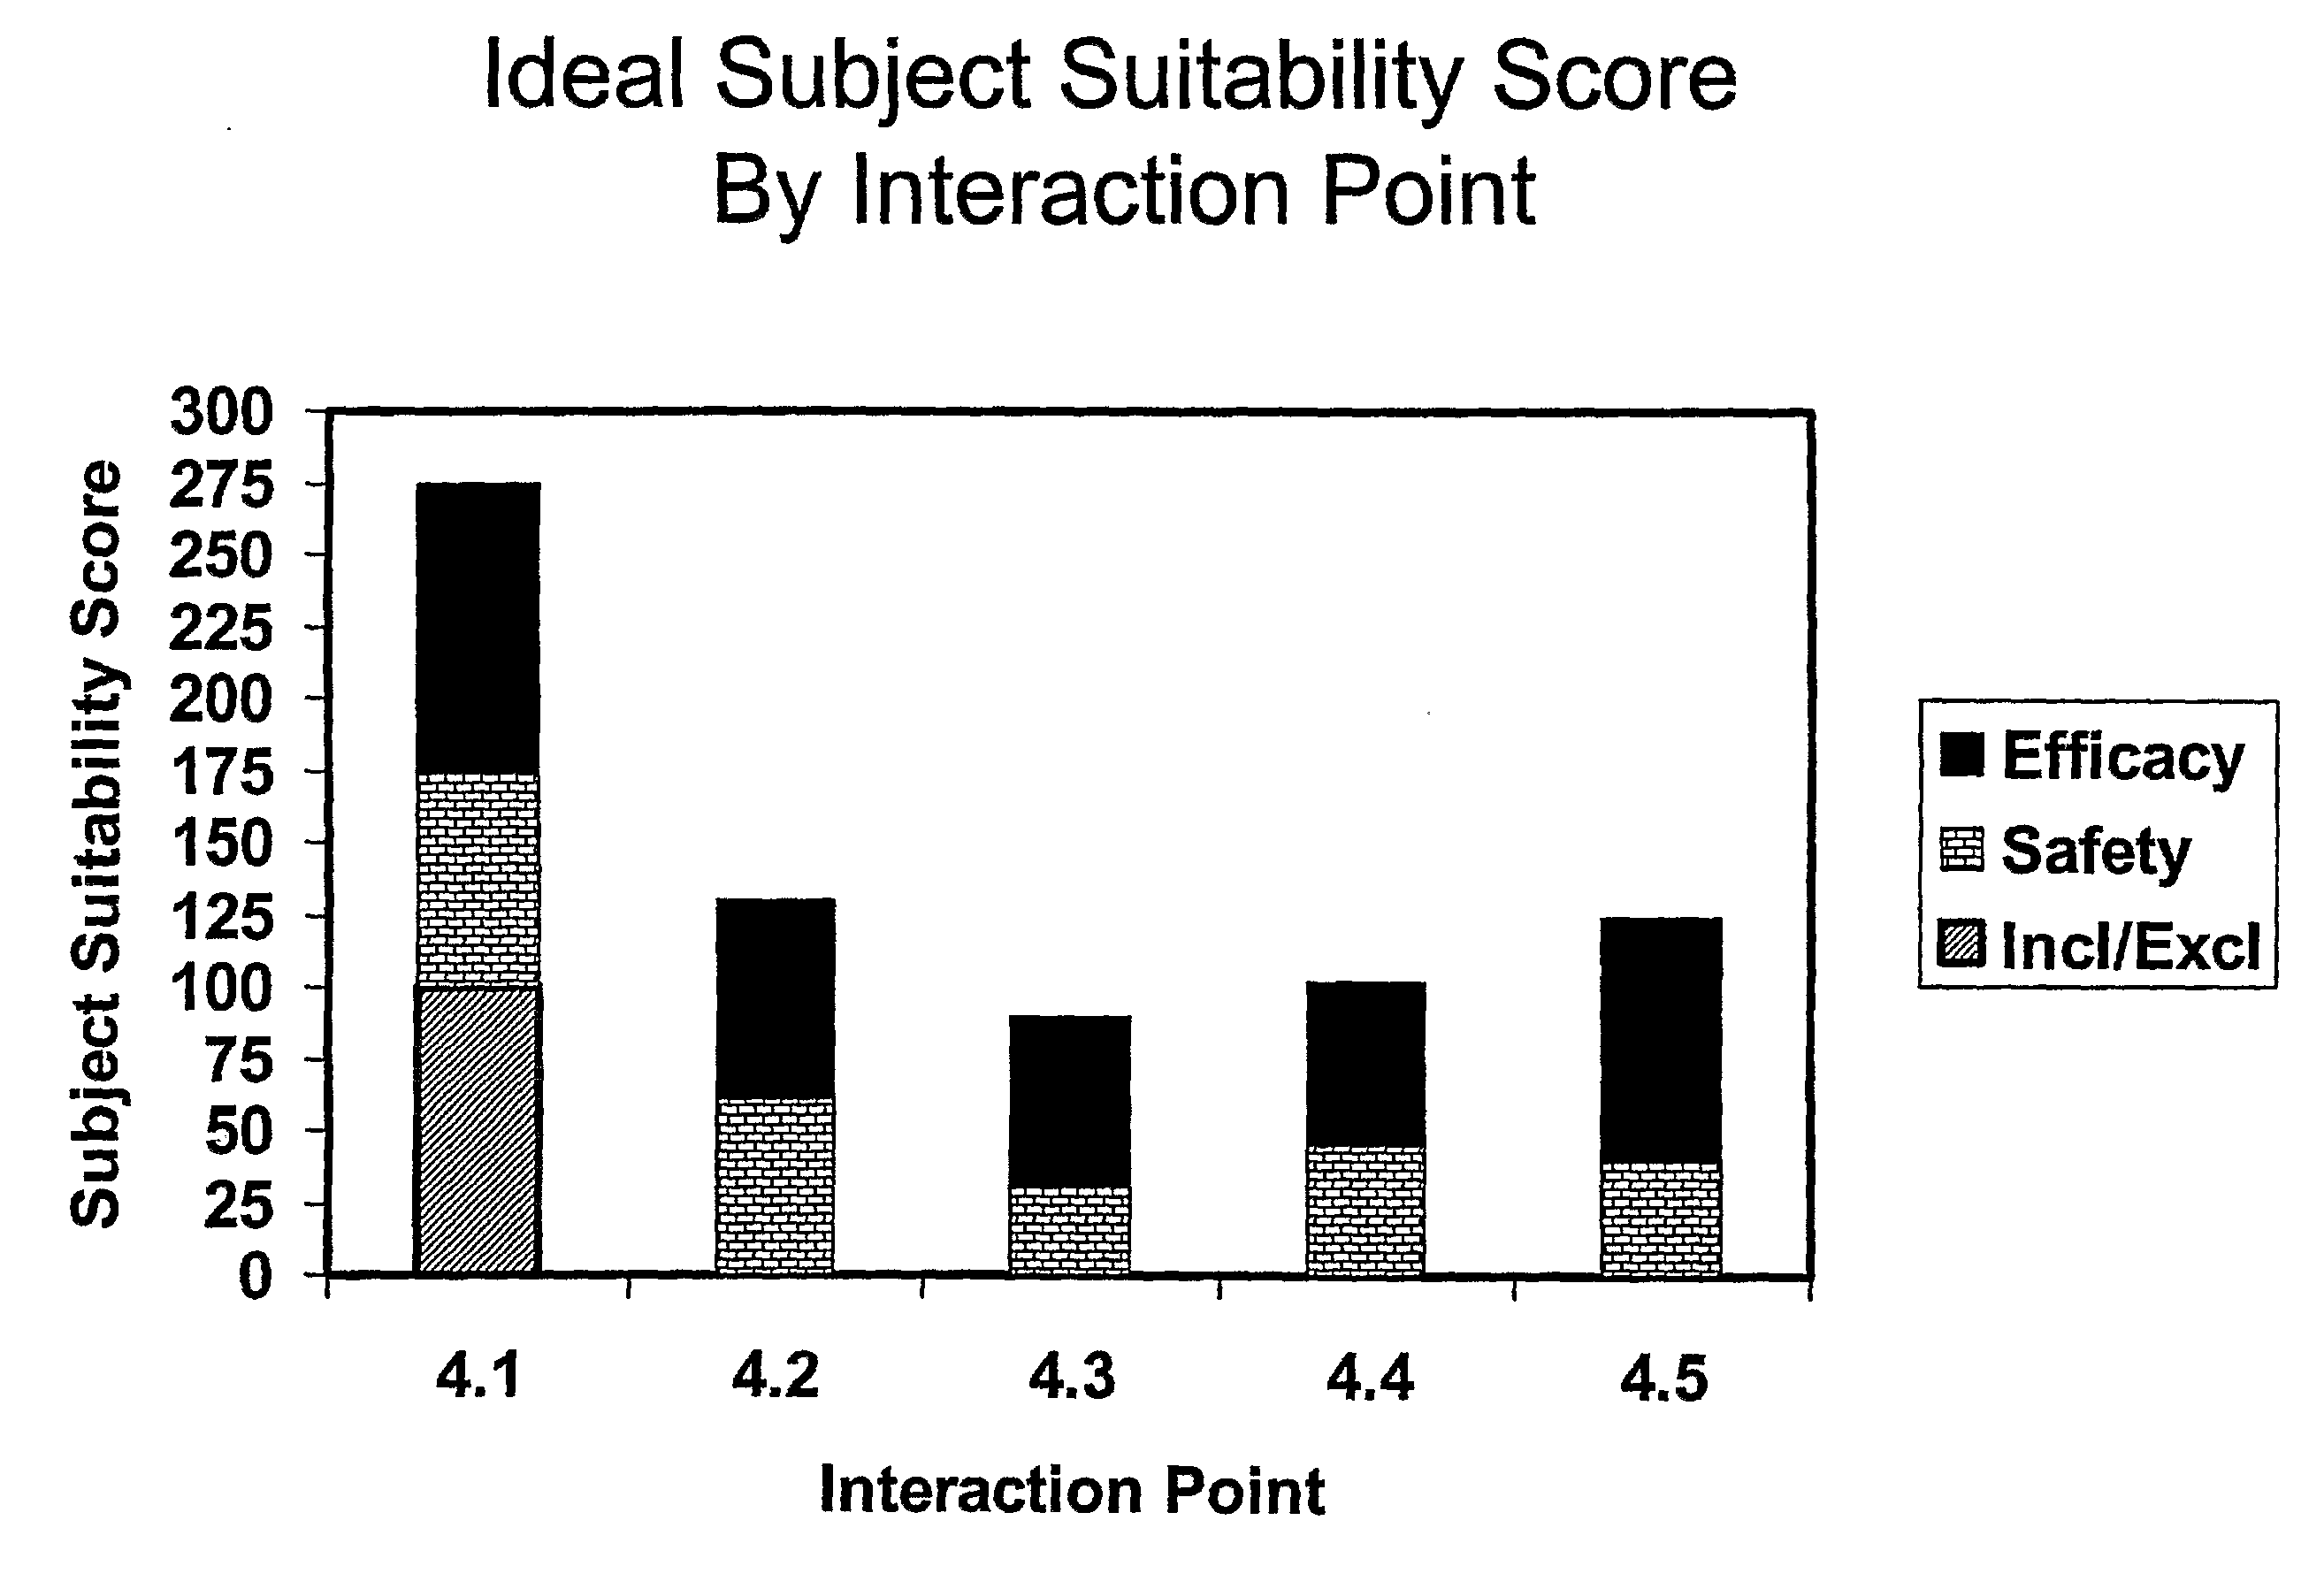 System and Method for Assessing Data Quality During Clinical Trials